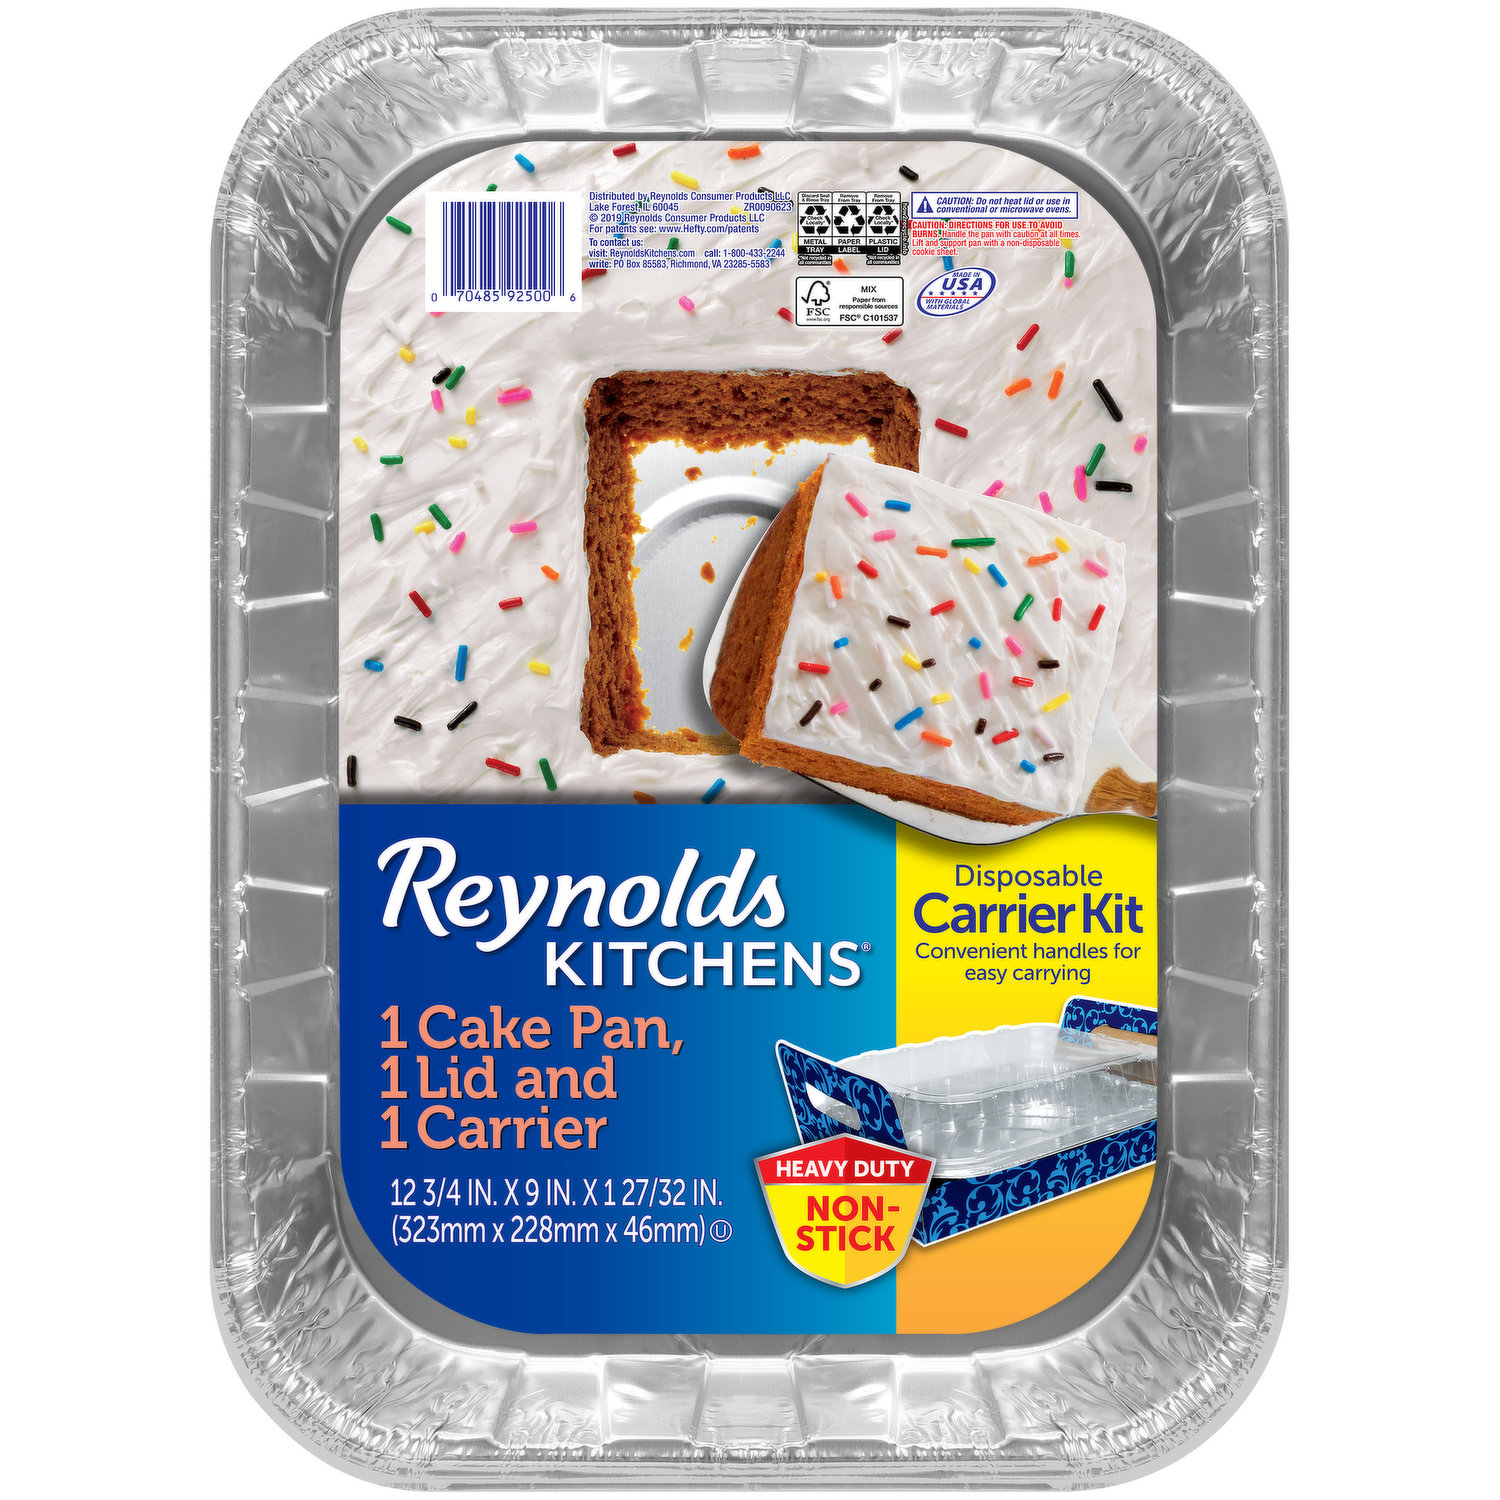 Reynolds Kitchens 12.75 x 9 x 1.84 in. Disposable Carrier Kit